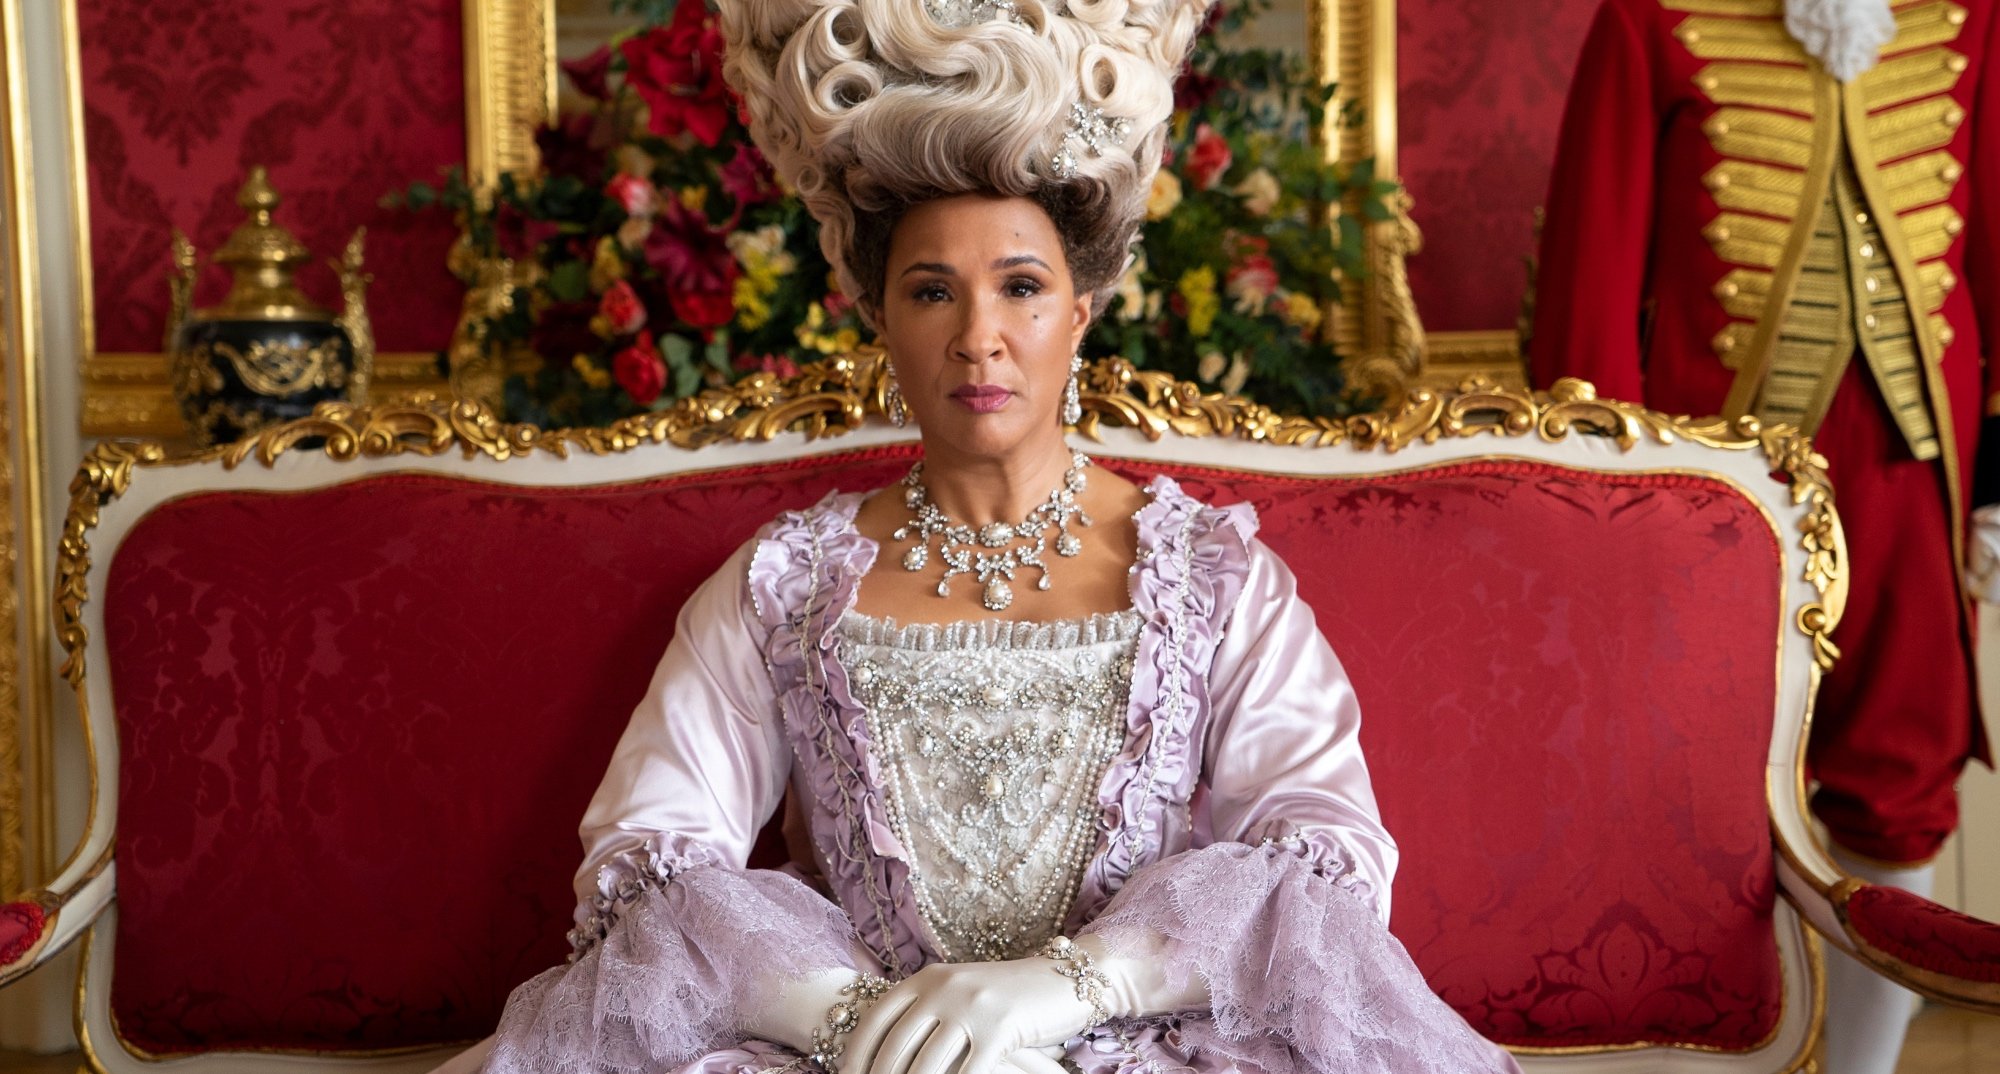 'Bridgerton' Season 2 Sets up Spinoff Series With the Queen, Violet